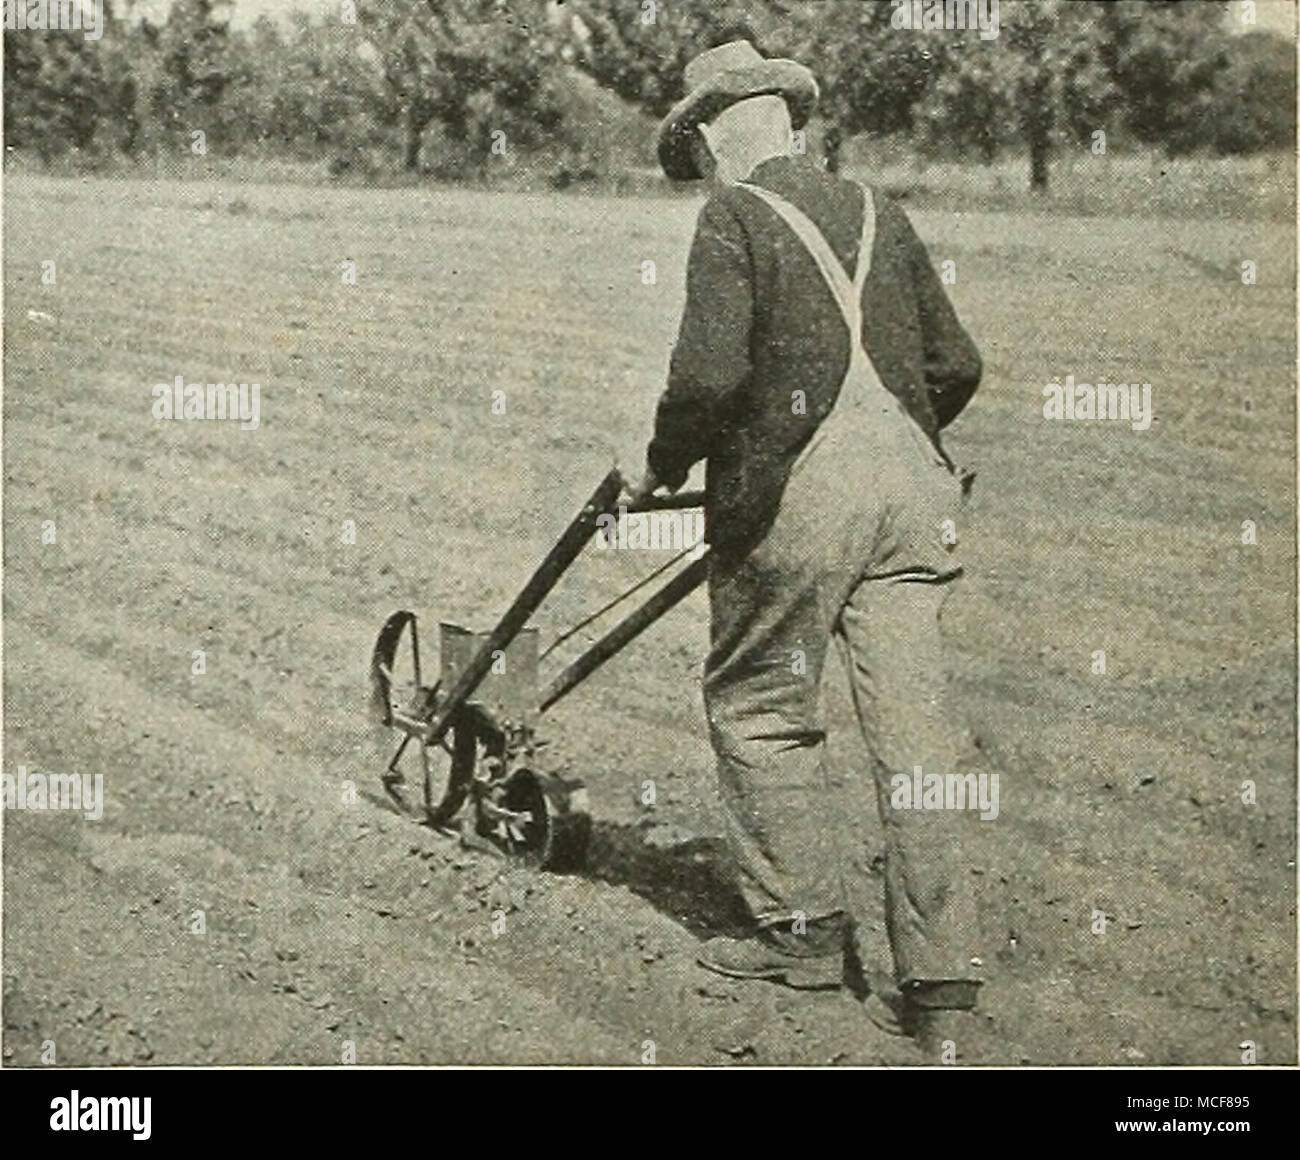 Planet Jr No 3 Seeder At Work In The Market Garden Planet Jr No 12 Double Wheel Hoe Cultivator And Plow Price 6 50 Steel Frame 14 Inch Steel Wheels Stock Photo Alamy